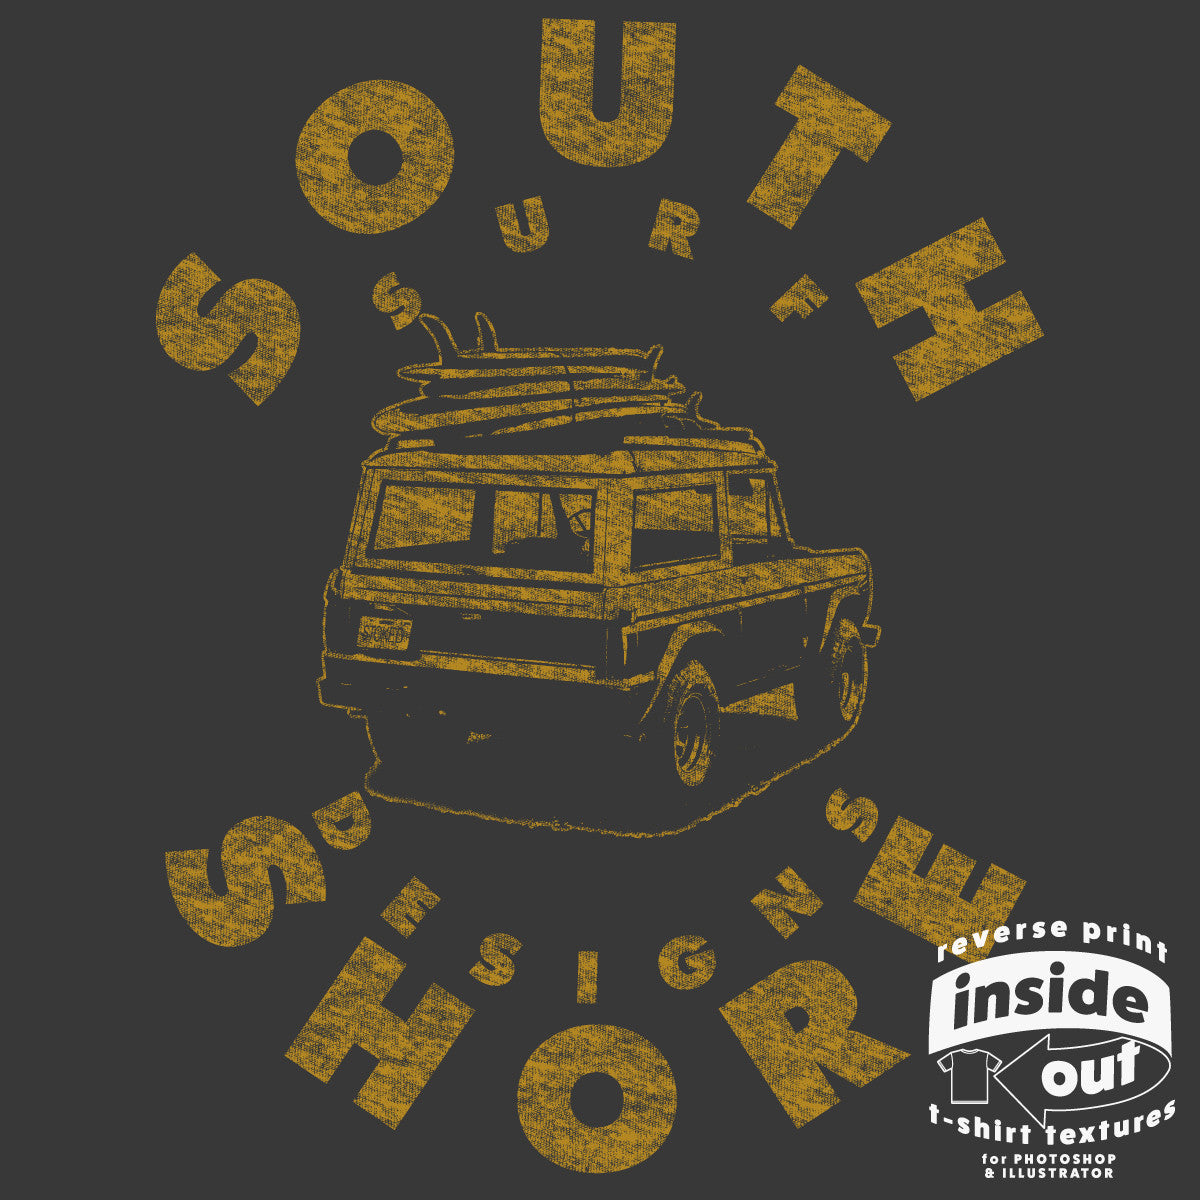 Inside Out: Reverse Print T-Shirt Textures - TheVectorLab